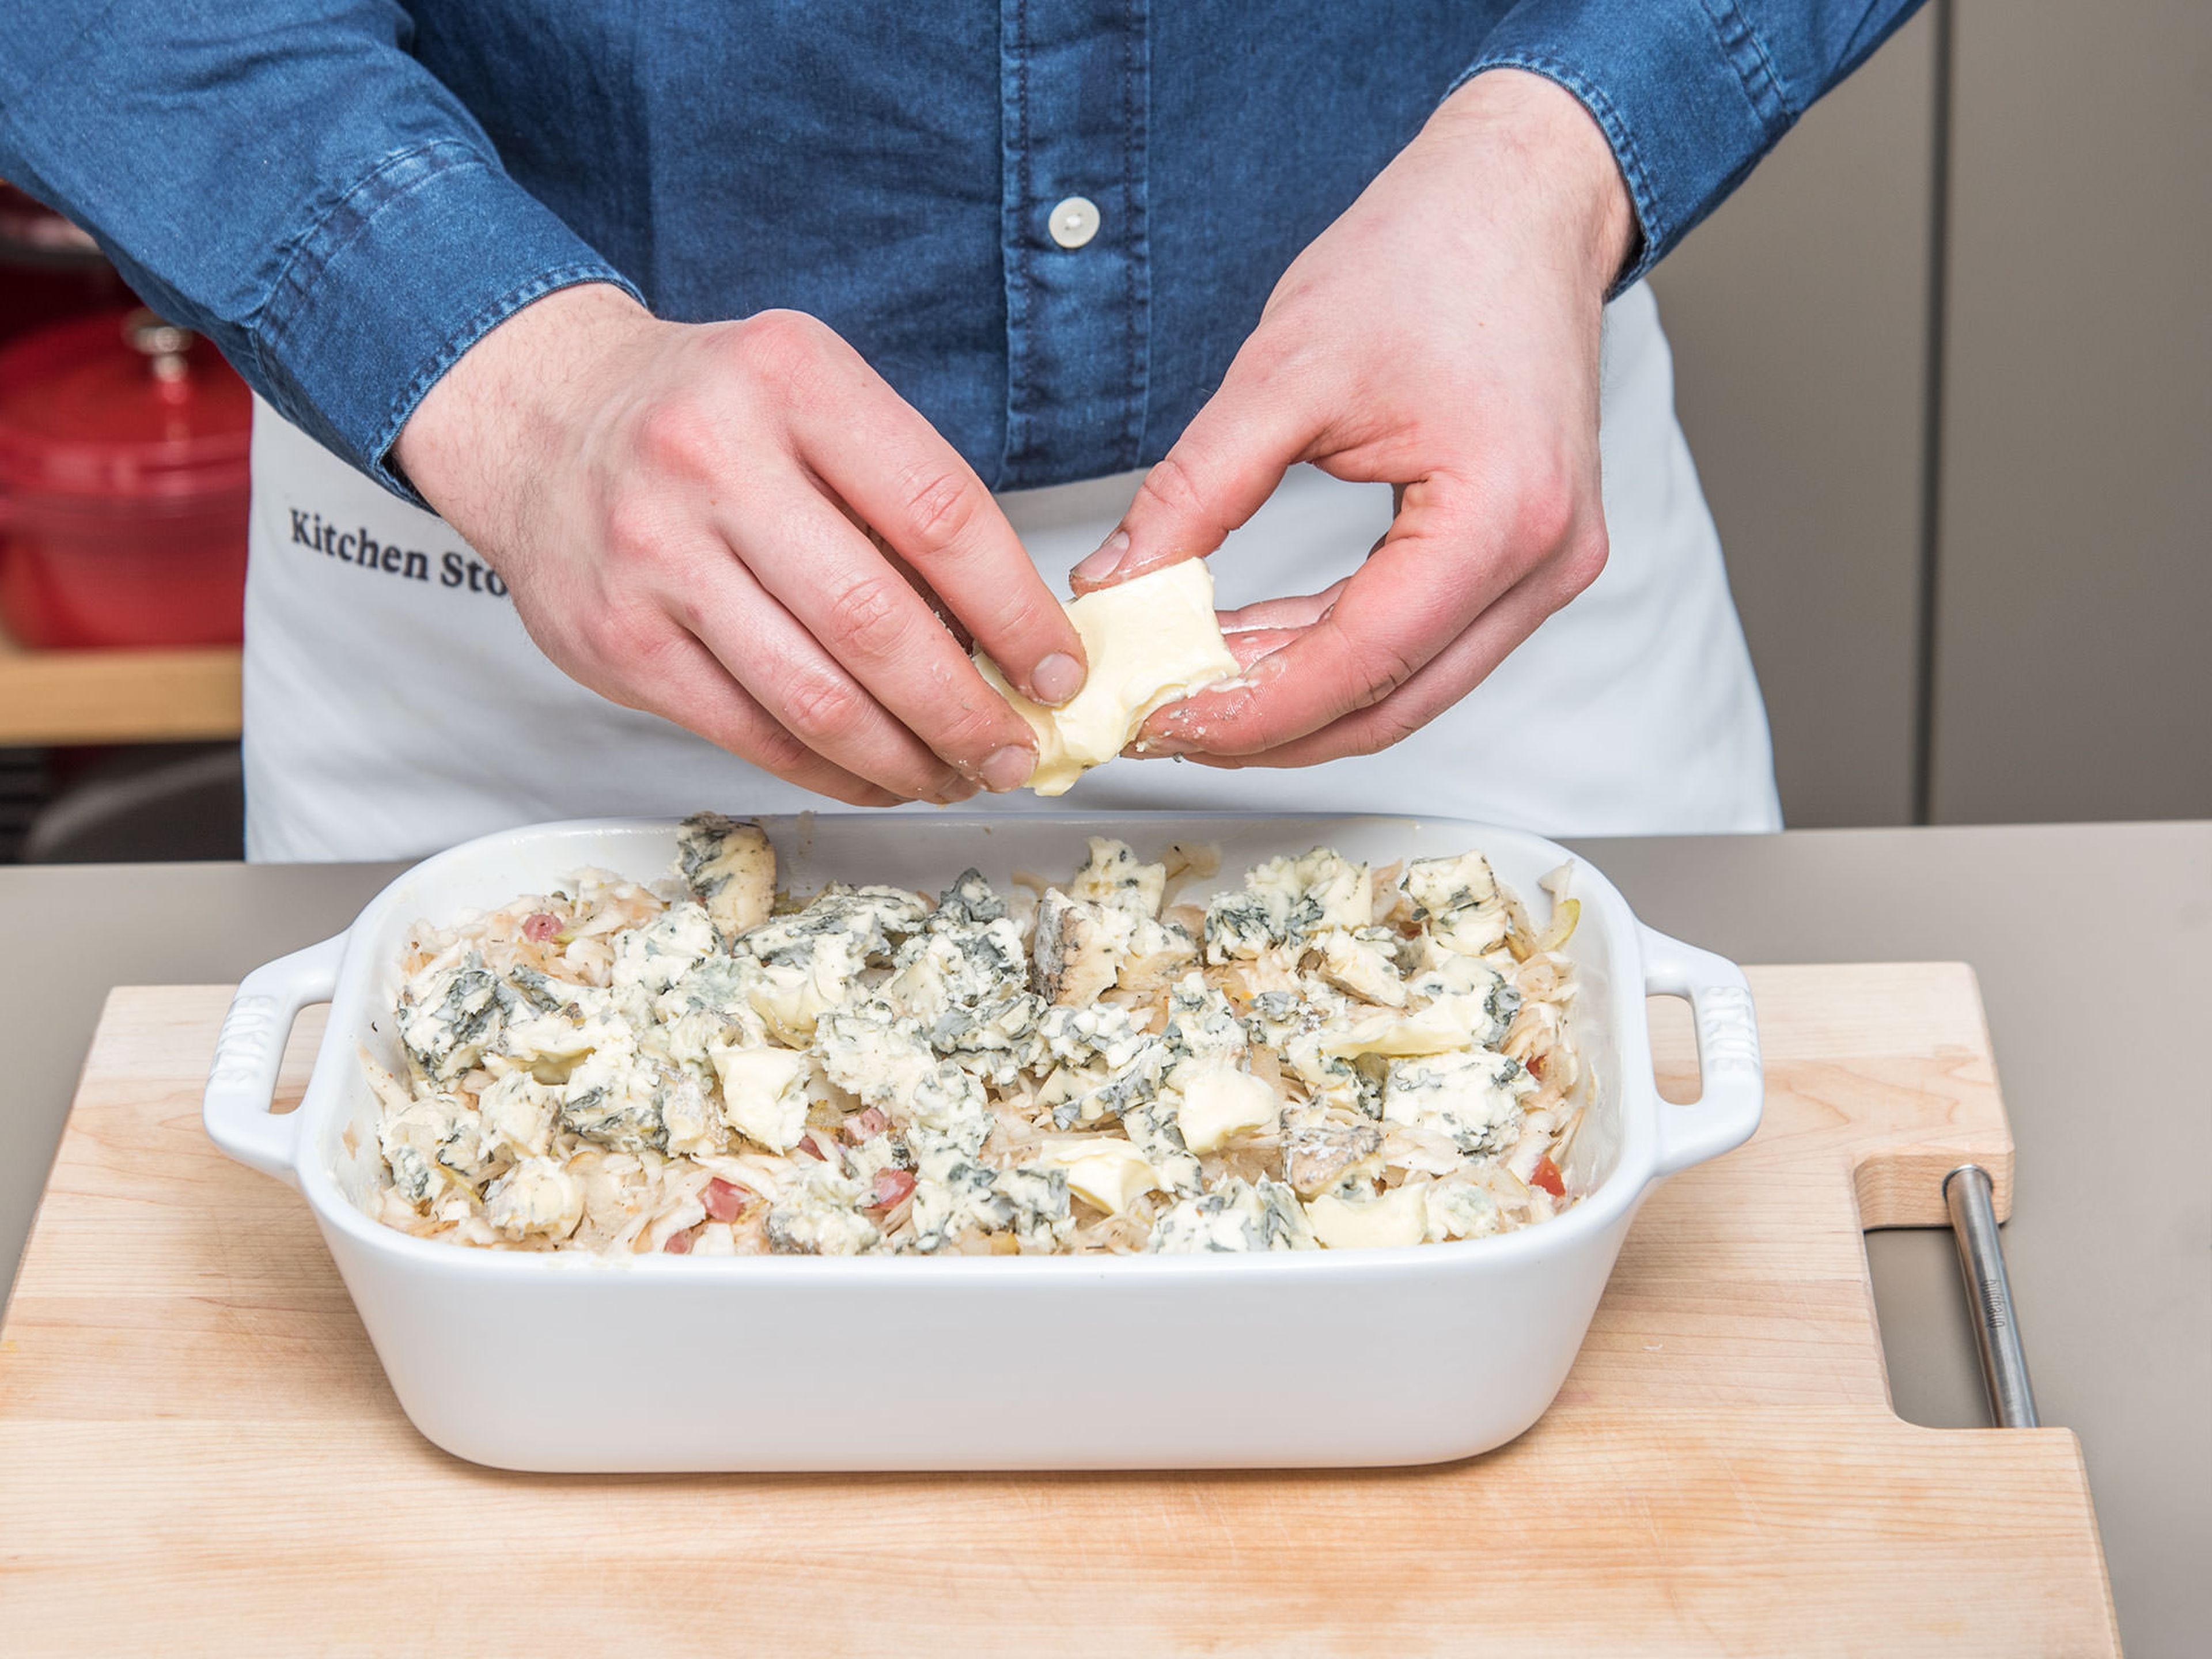 Add the mixture of celery root, pears, and bacon to the baking dish. Pour vegetable stock evenly over it. Crumble blue cheese and distribute crumbled blue cheese, butter, and ground almonds over the celery root-pear mixture.